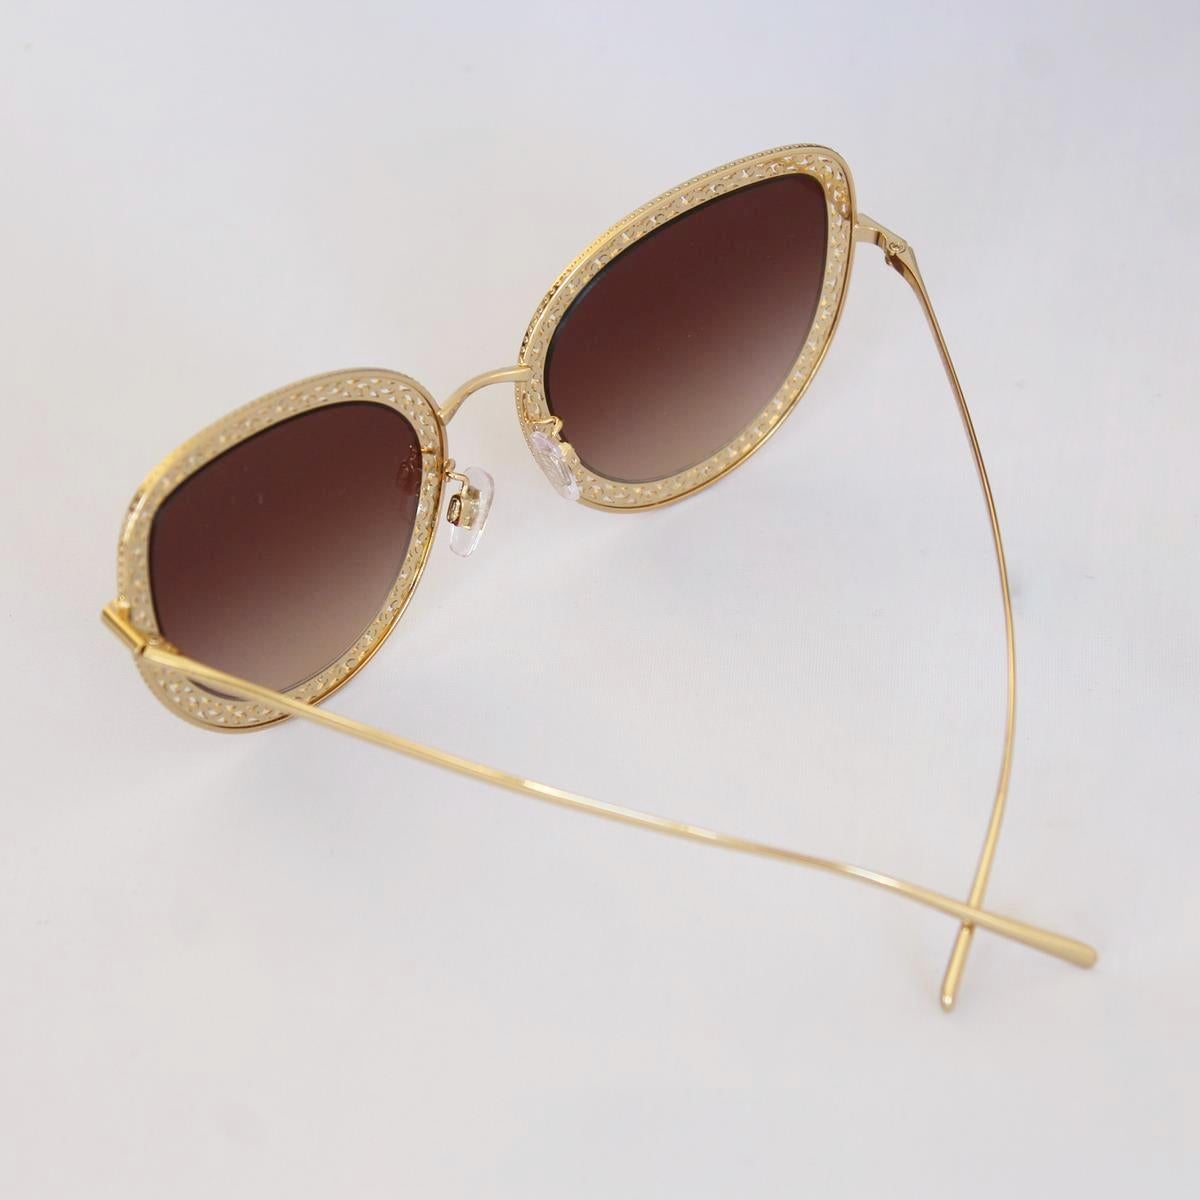 SS 2019
DG 2226
Cat eye sunglasses 
Metal profile
“Cuore Sacro” decoration
Small beads placed on the edge of the frame
Frame Color: Shiny gold
Temple Color: Shiny gold
Lens Color: Brown gradient
Length cm 15 (5.9 inches)
 
Condition: New with